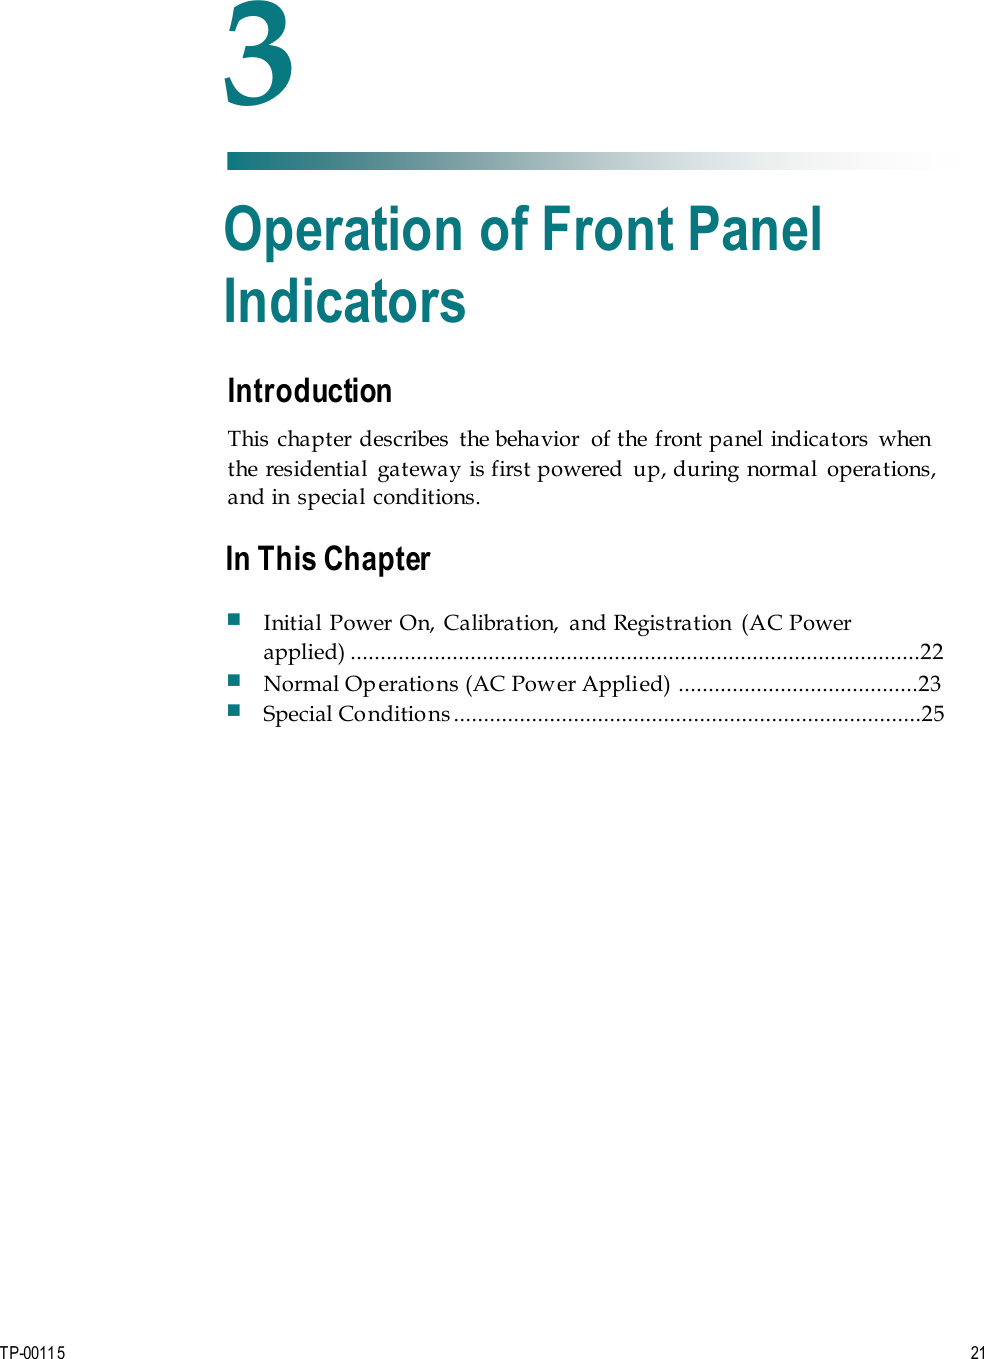 TP-00115  21 Introduction This chapter describes  the behavior  of the front panel indicators  when the  residential  gateway is first powered  up, during normal  operations, and in special conditions. 3 Chapter 3 Operation of Front Panel Indicators In This Chapter Initial Power On, Calibration,  and Registration  (AC Power applied) ...............................................................................................22 Normal Operations (AC Power Applied) ........................................23 Special Conditions ..............................................................................25 